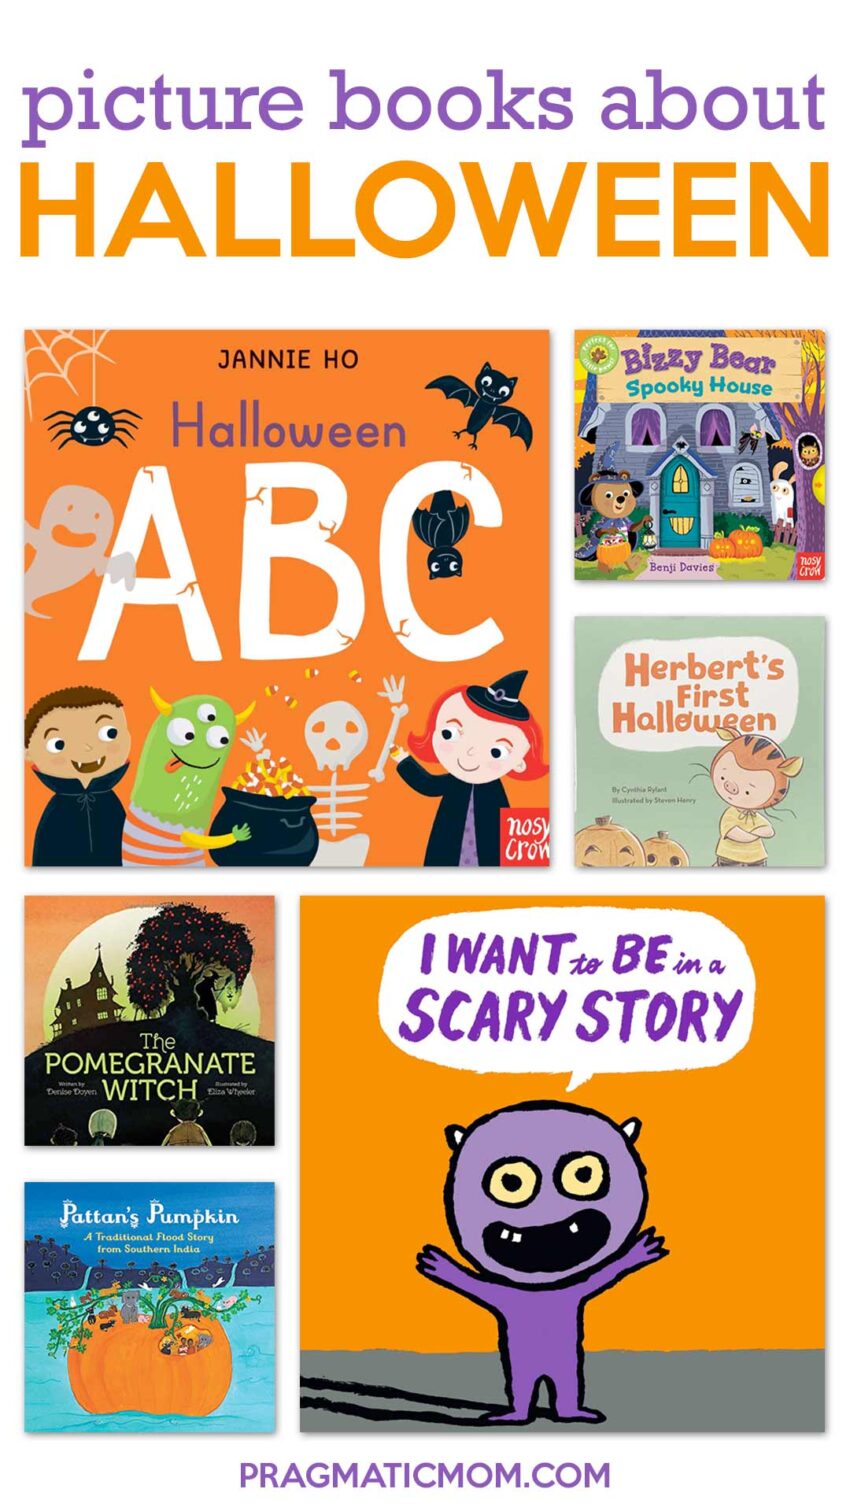 Halloween Picture Books